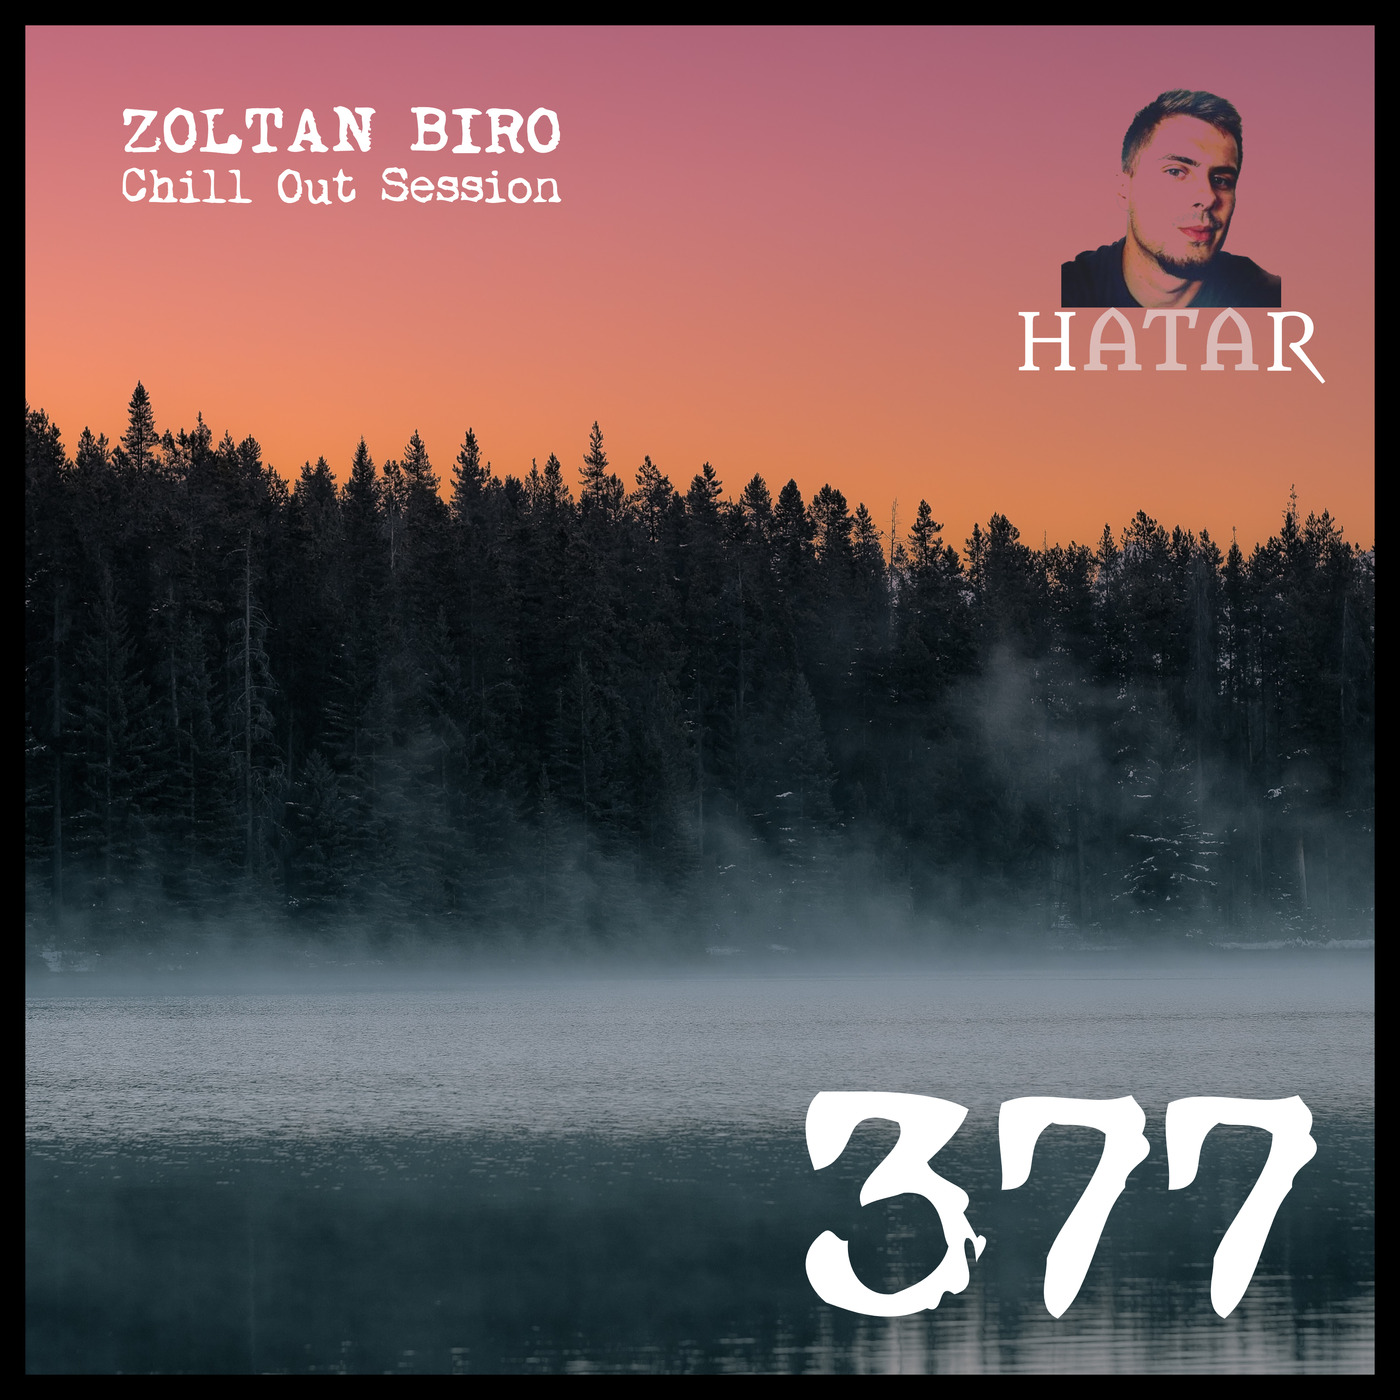 Zoltan Biro - Chill Out Session 377 [including: Hatar Special Mix]